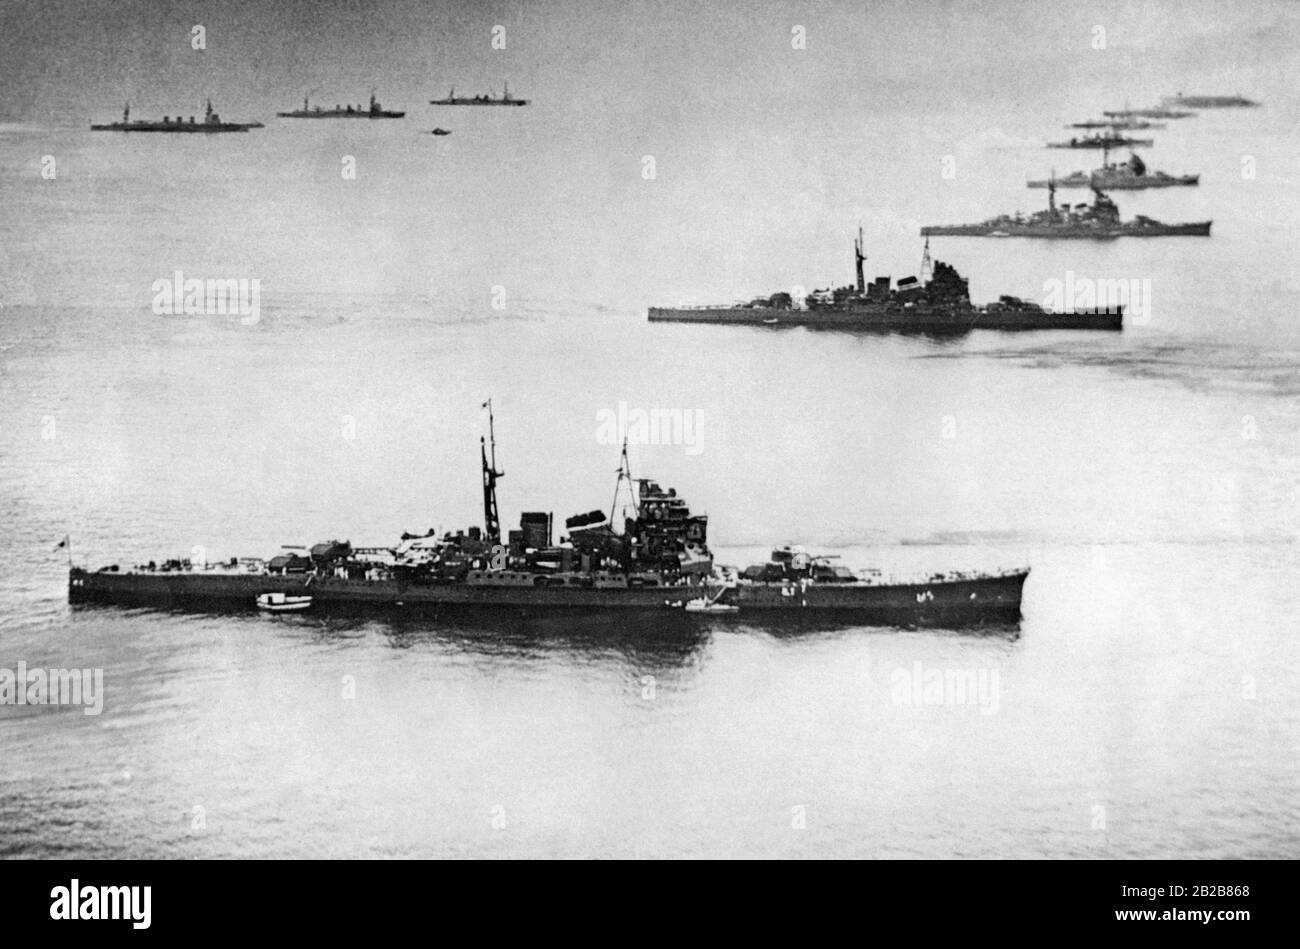 View over the sea near Tokyo. Some warships of the Imperial Japanese Navy enter the port of Tokyo after a naval maneuver off the coast. (Undated photo, ca. 1930s) Stock Photo